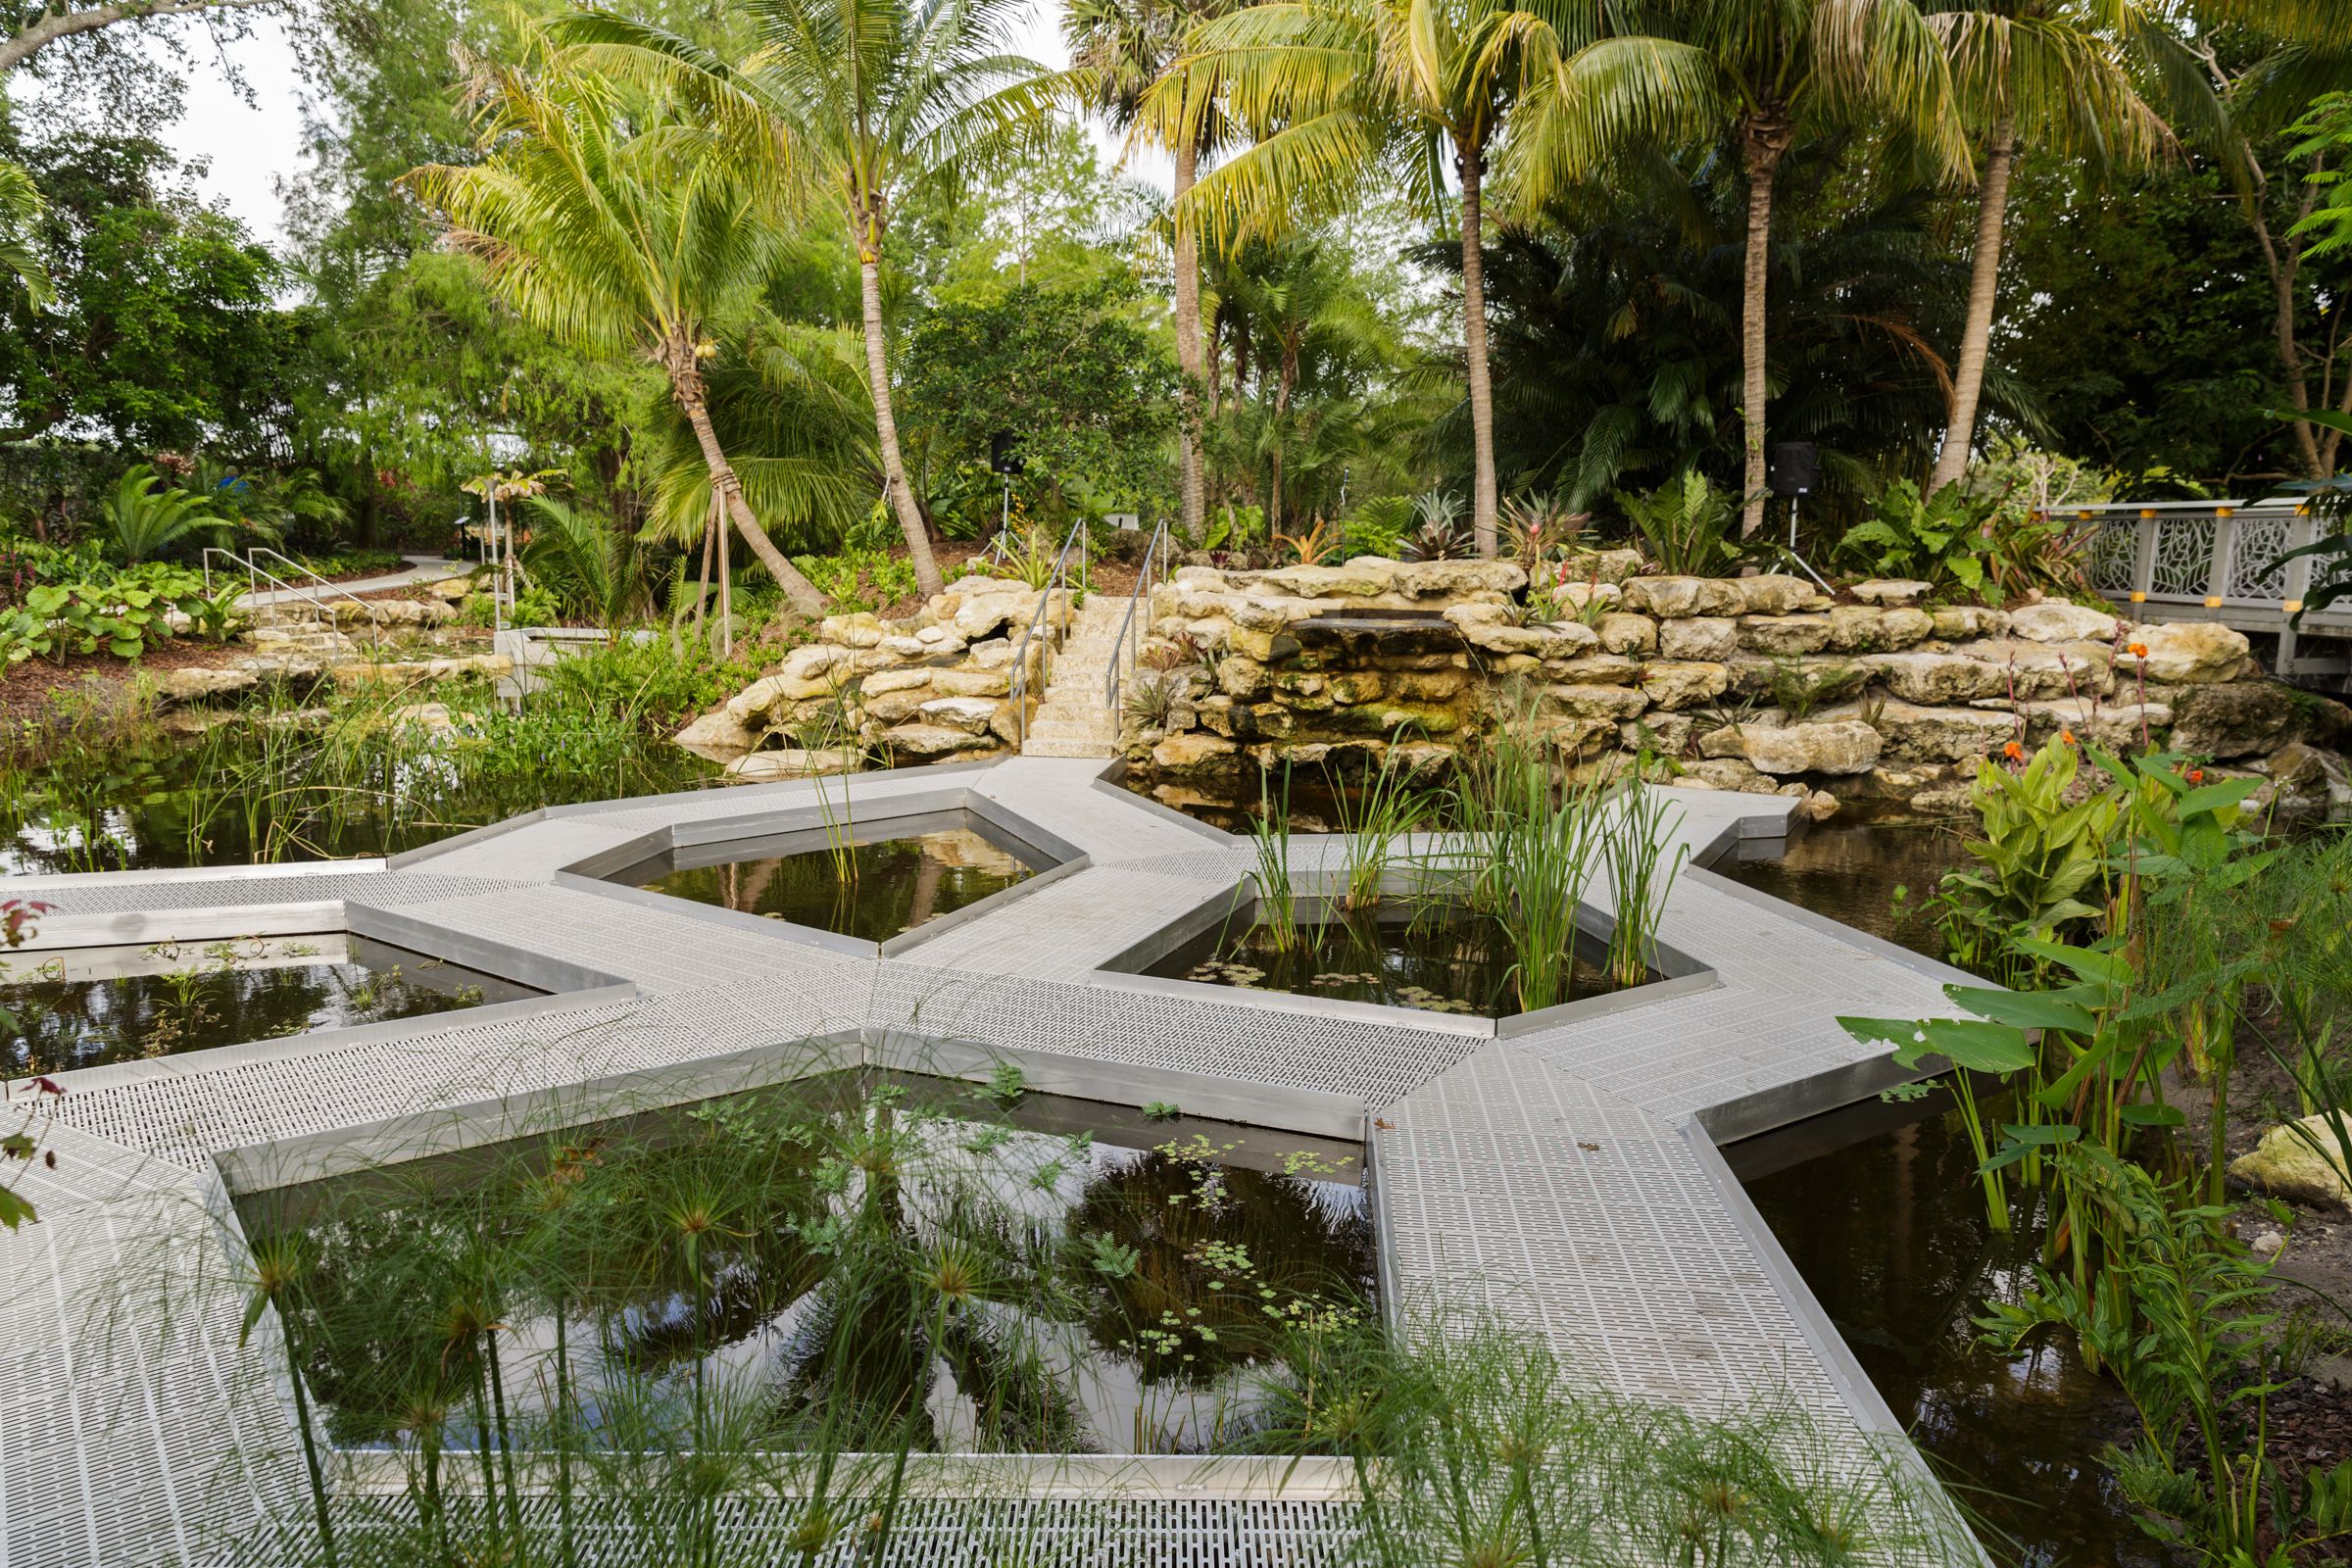 8 Eclectic Gardens to Explore in The Palm Beaches